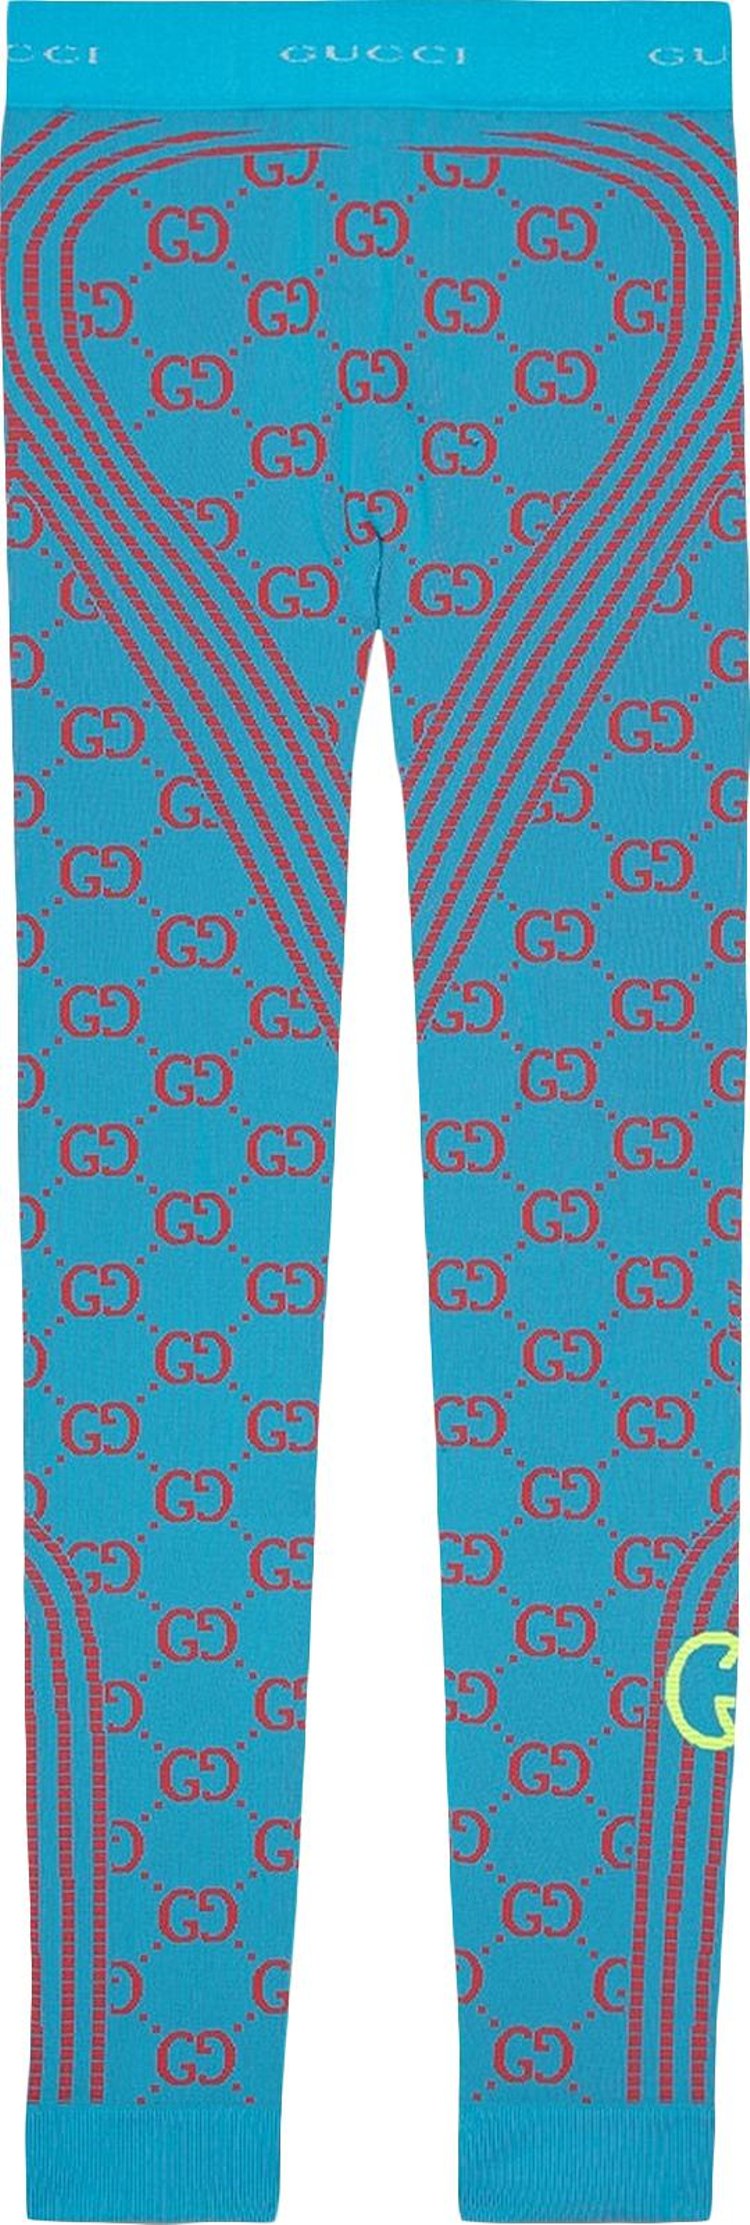 Gucci women's Gucci Love Parade leggings - buy for 382400 KZT in